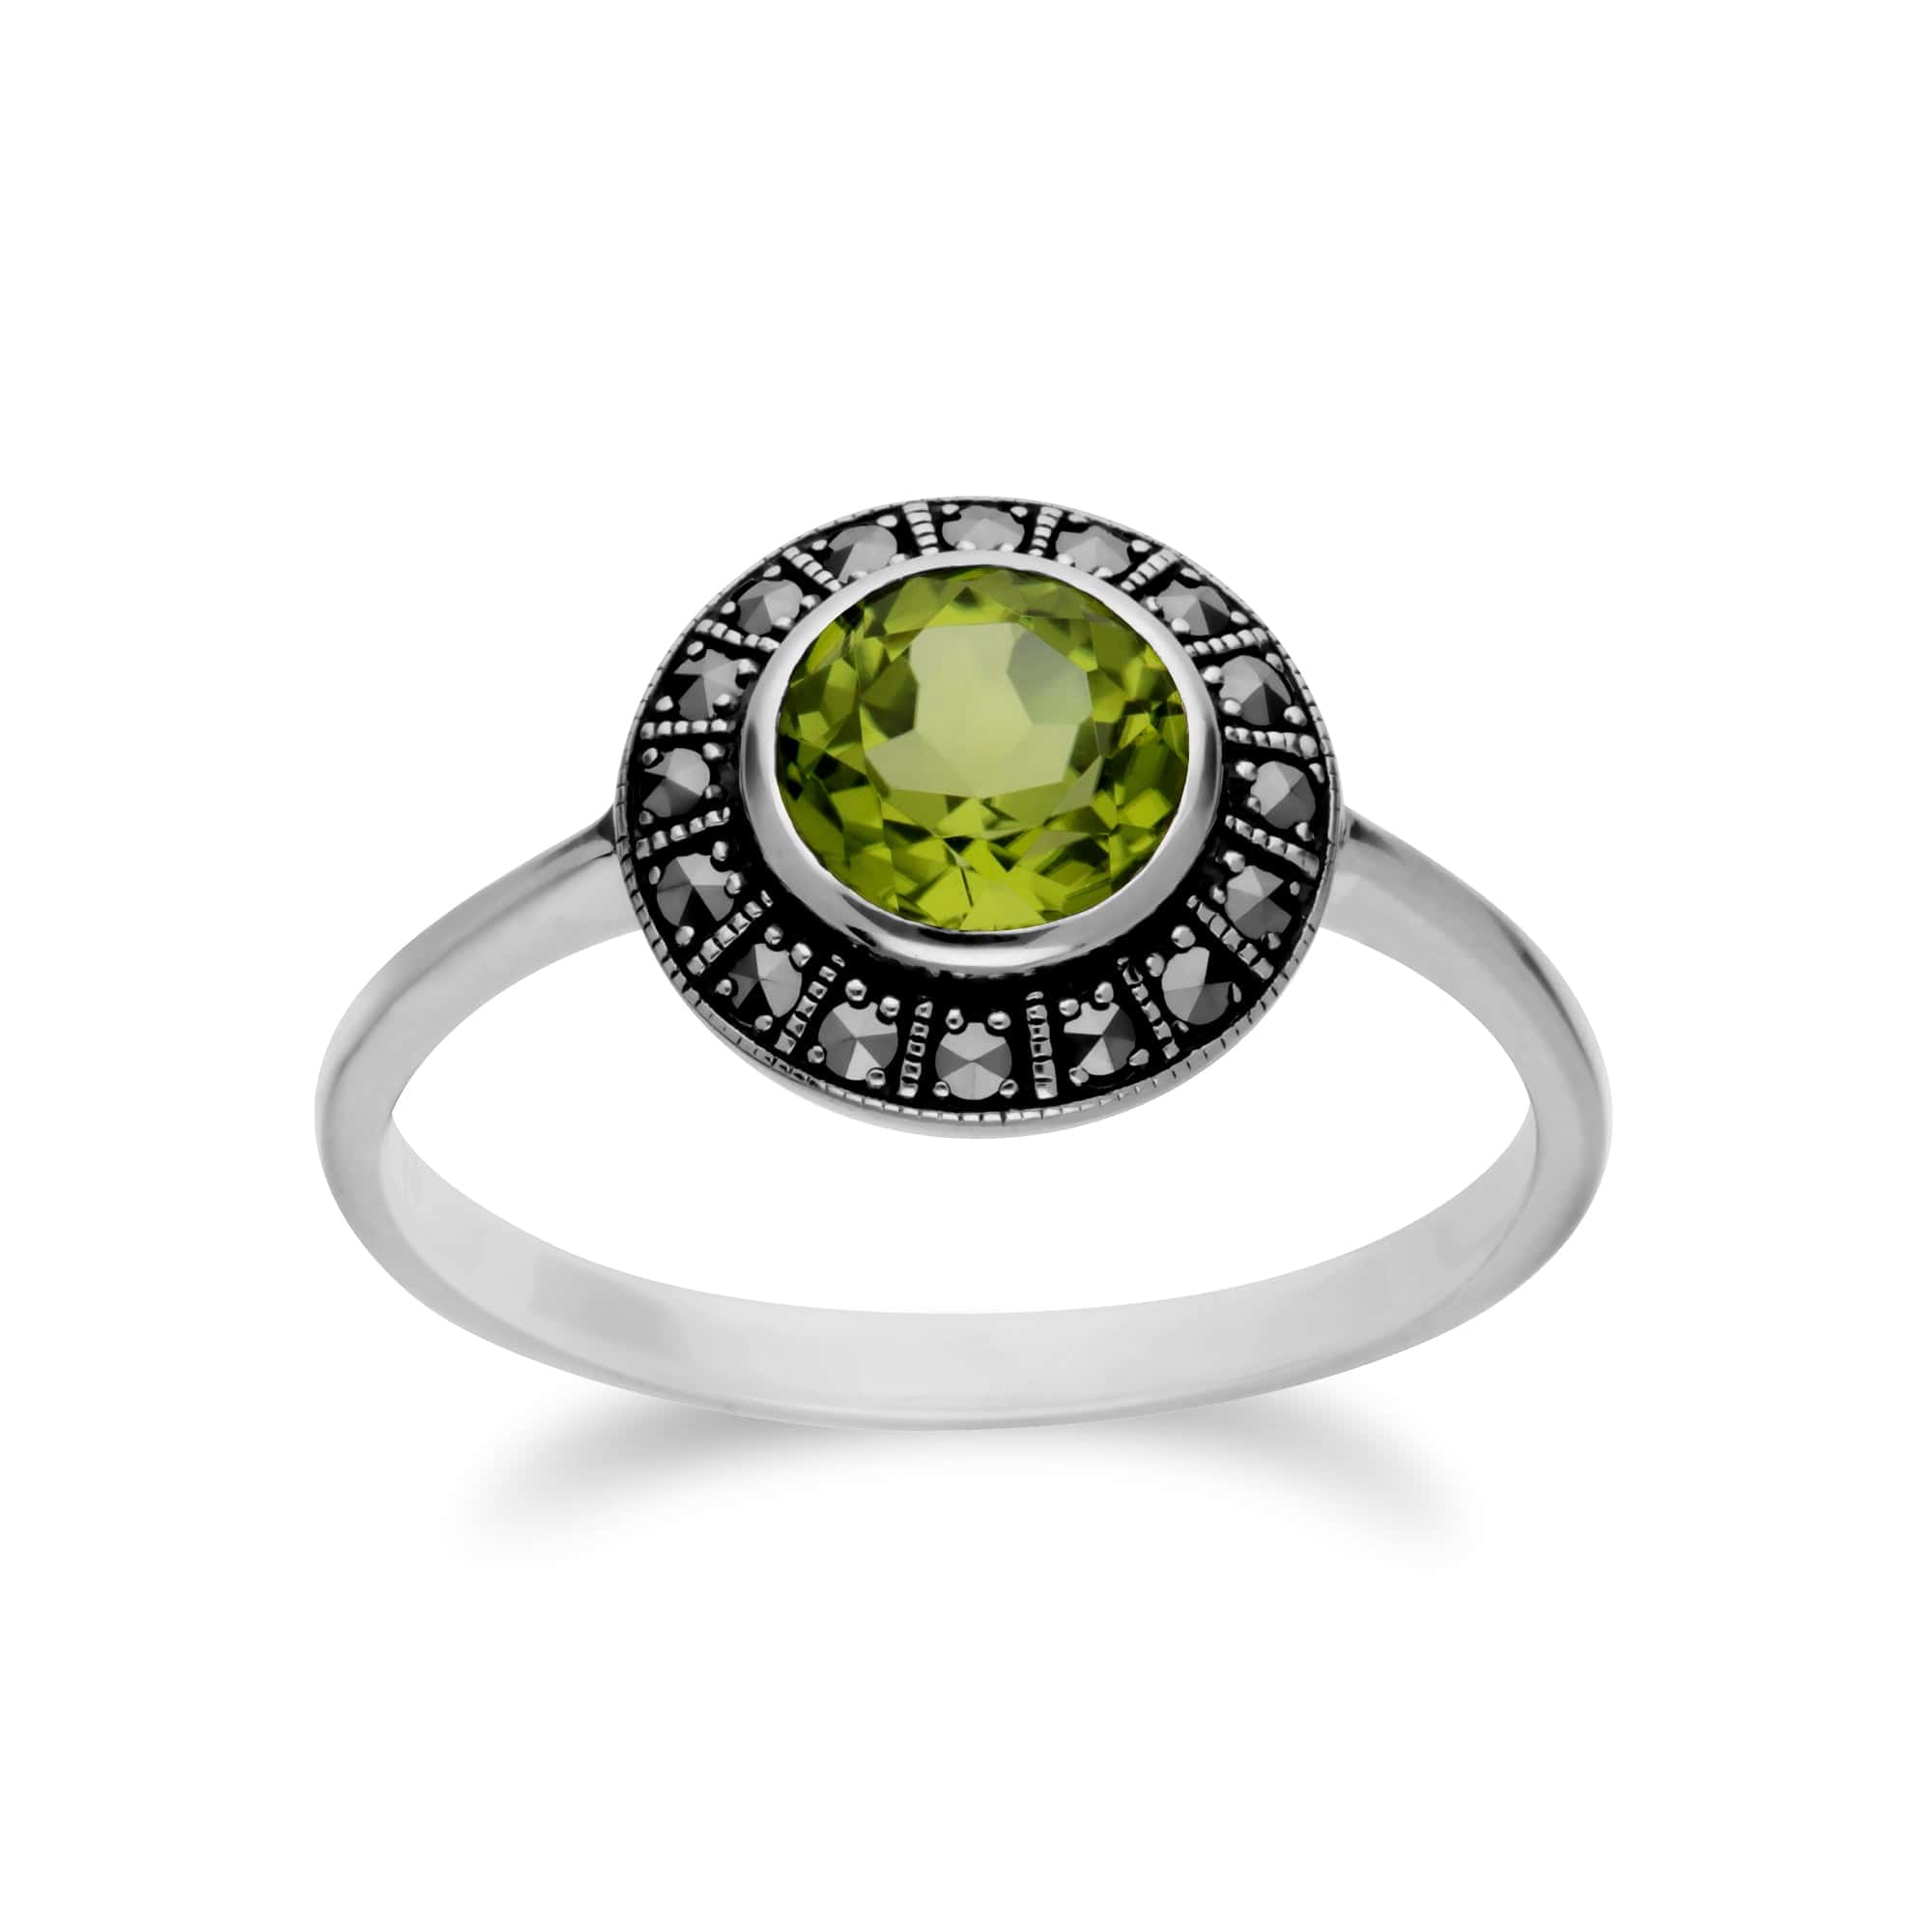 214R605604925 Art Deco Style Round Peridot & Marcasite Halo Ring in 925 Sterling Silver 1